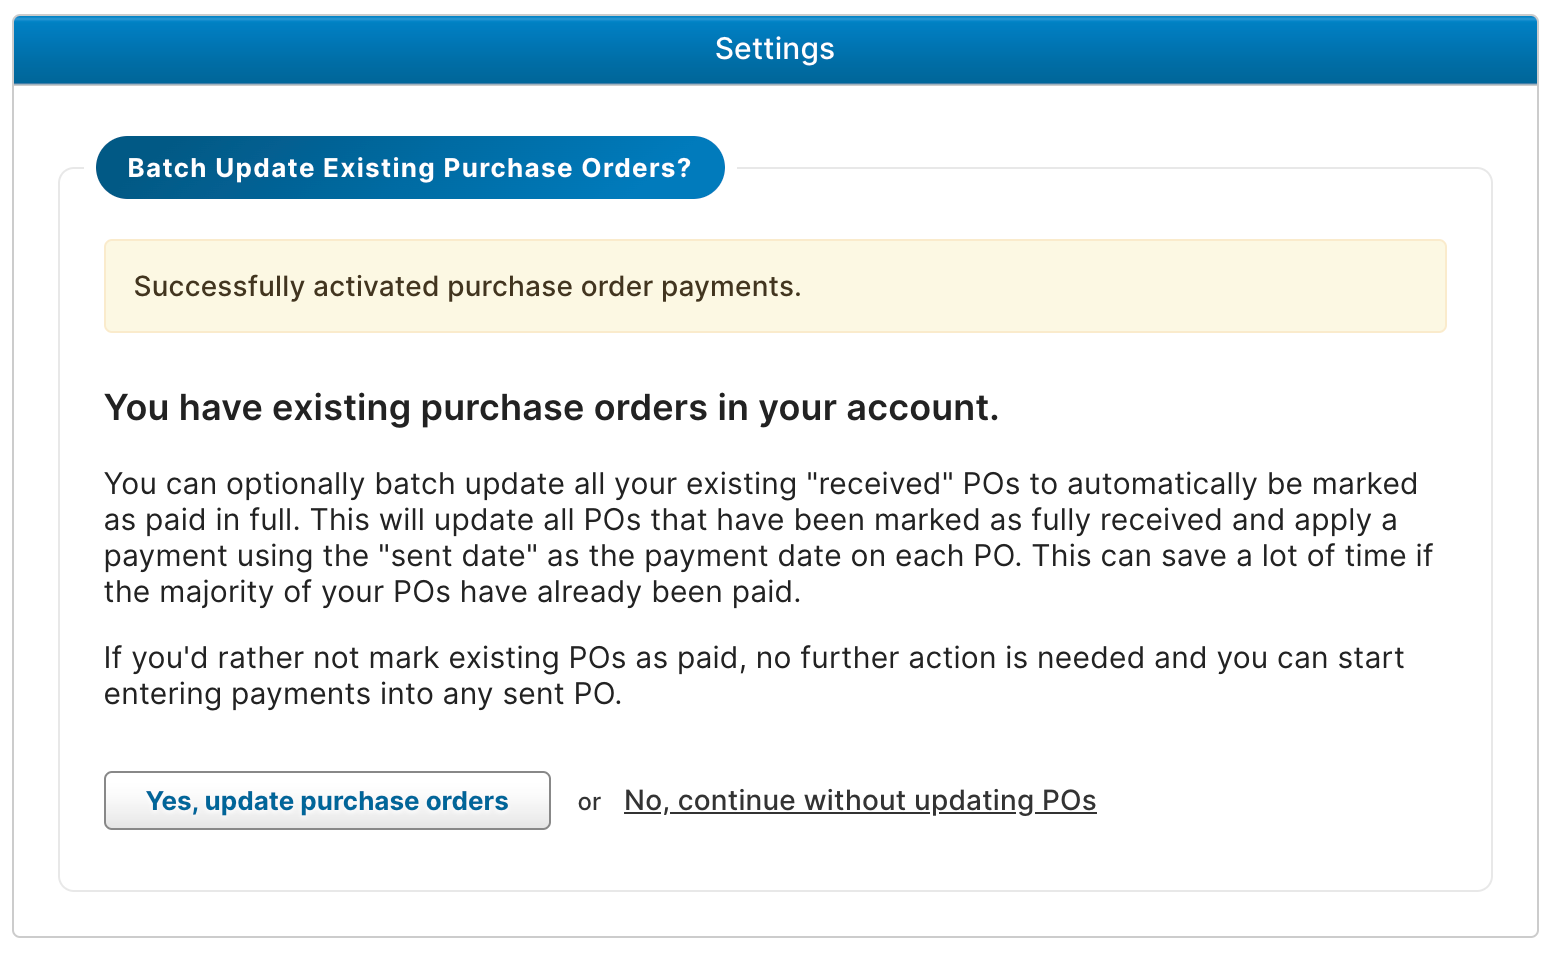 Batch update existing purchase orders